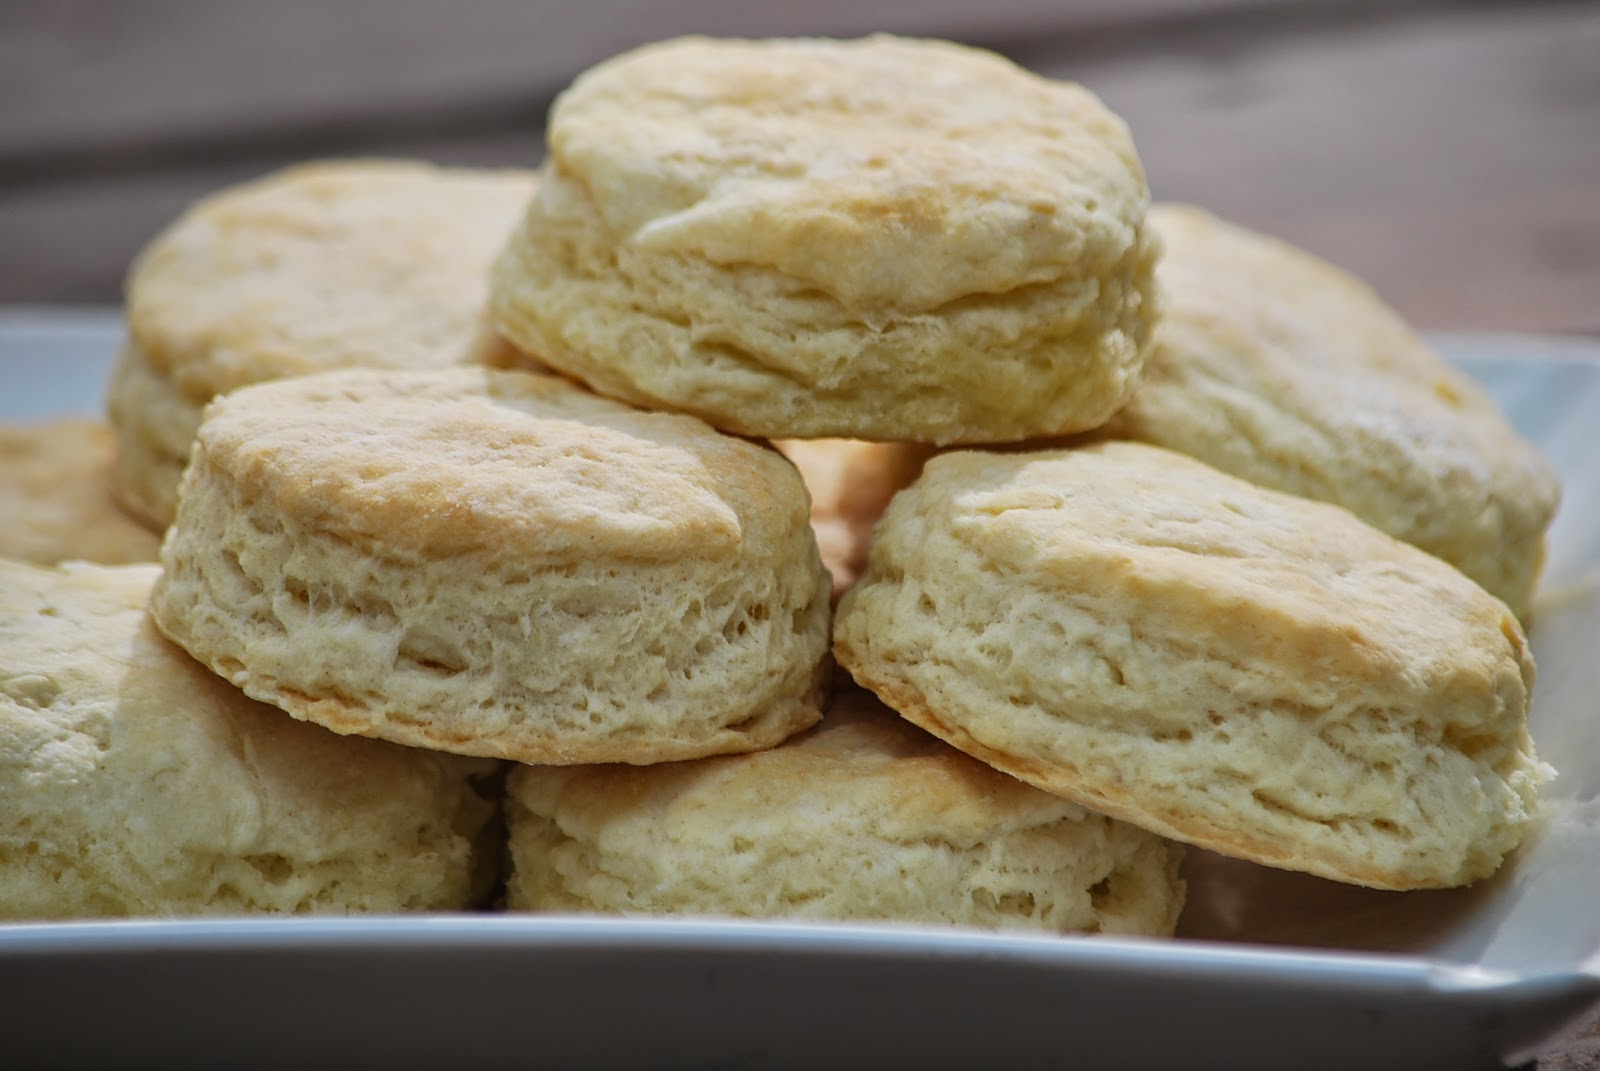 My story in recipes: Buttermilk Biscuits